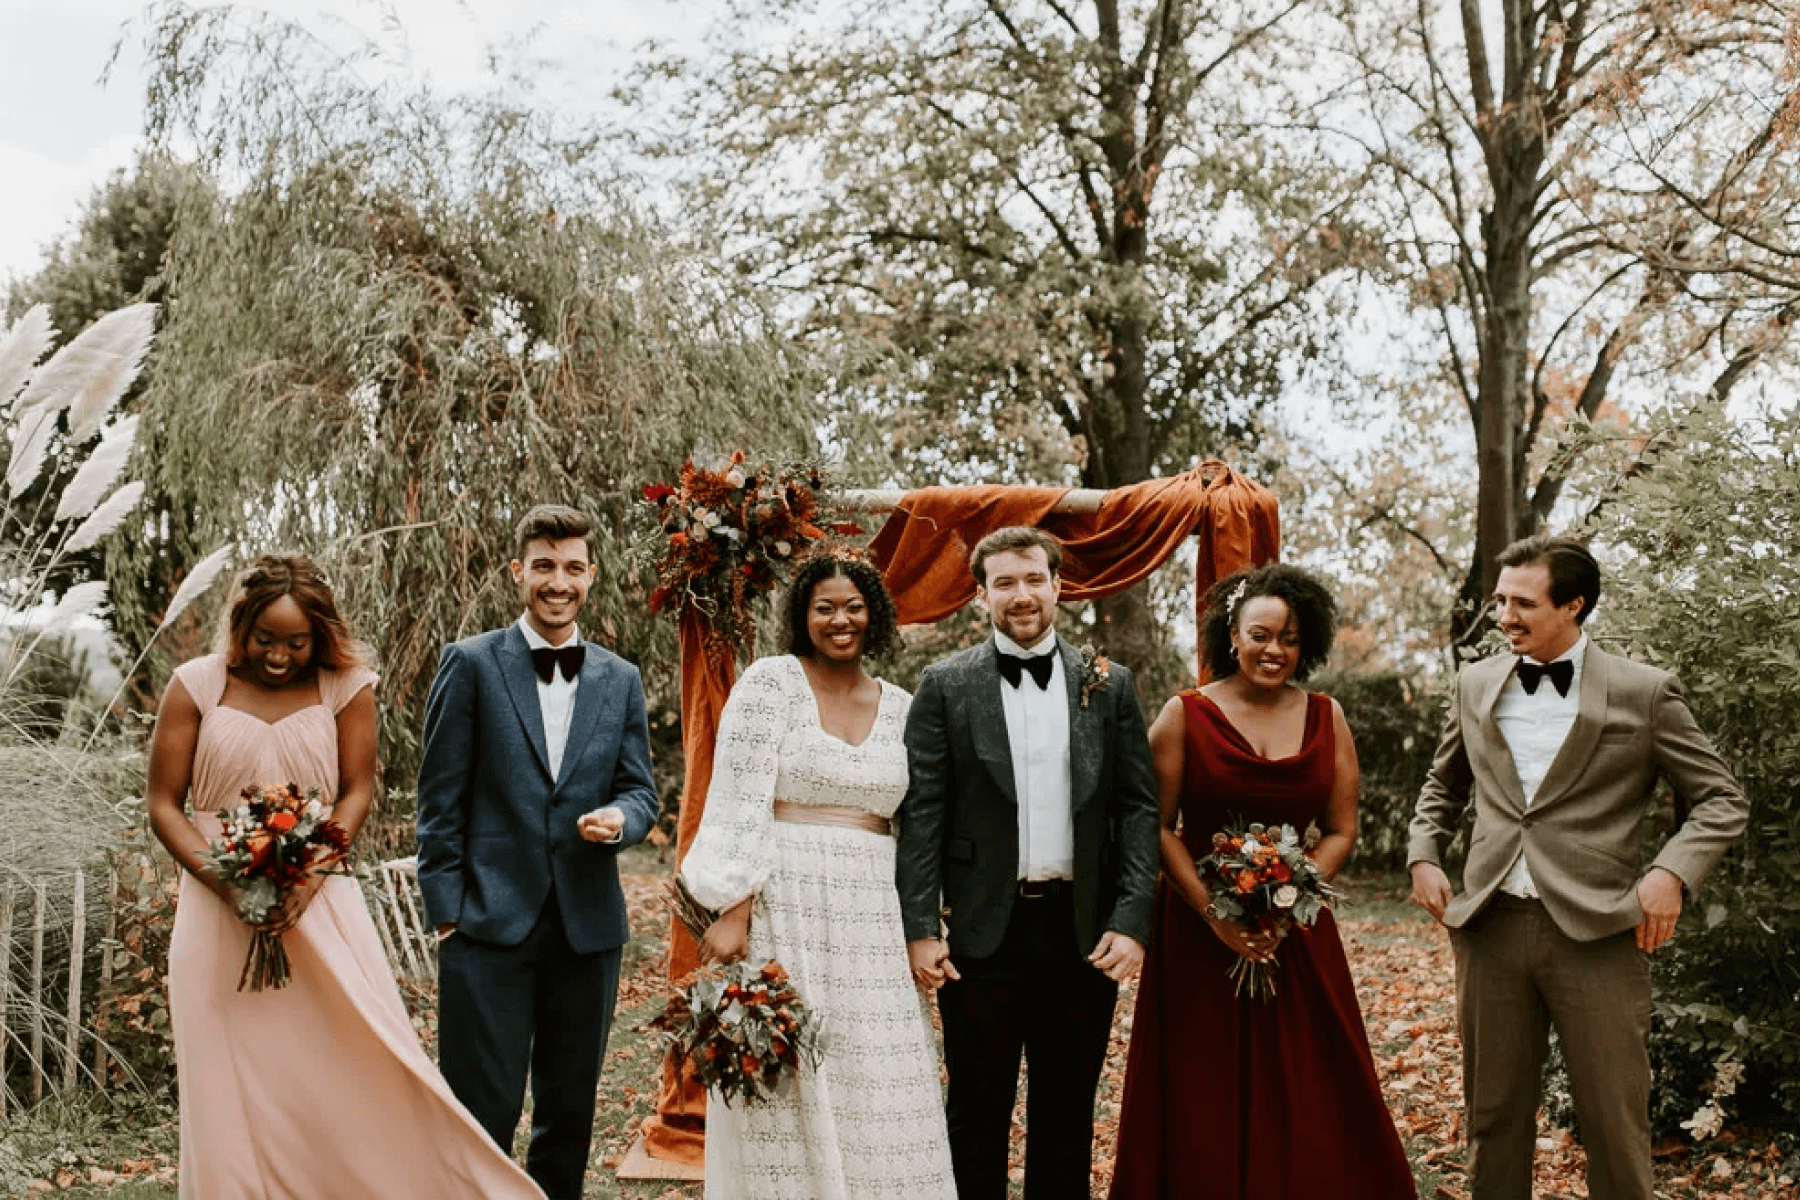 men and women wearing dressy outfits stand at a rustic outdoor wedding altar.